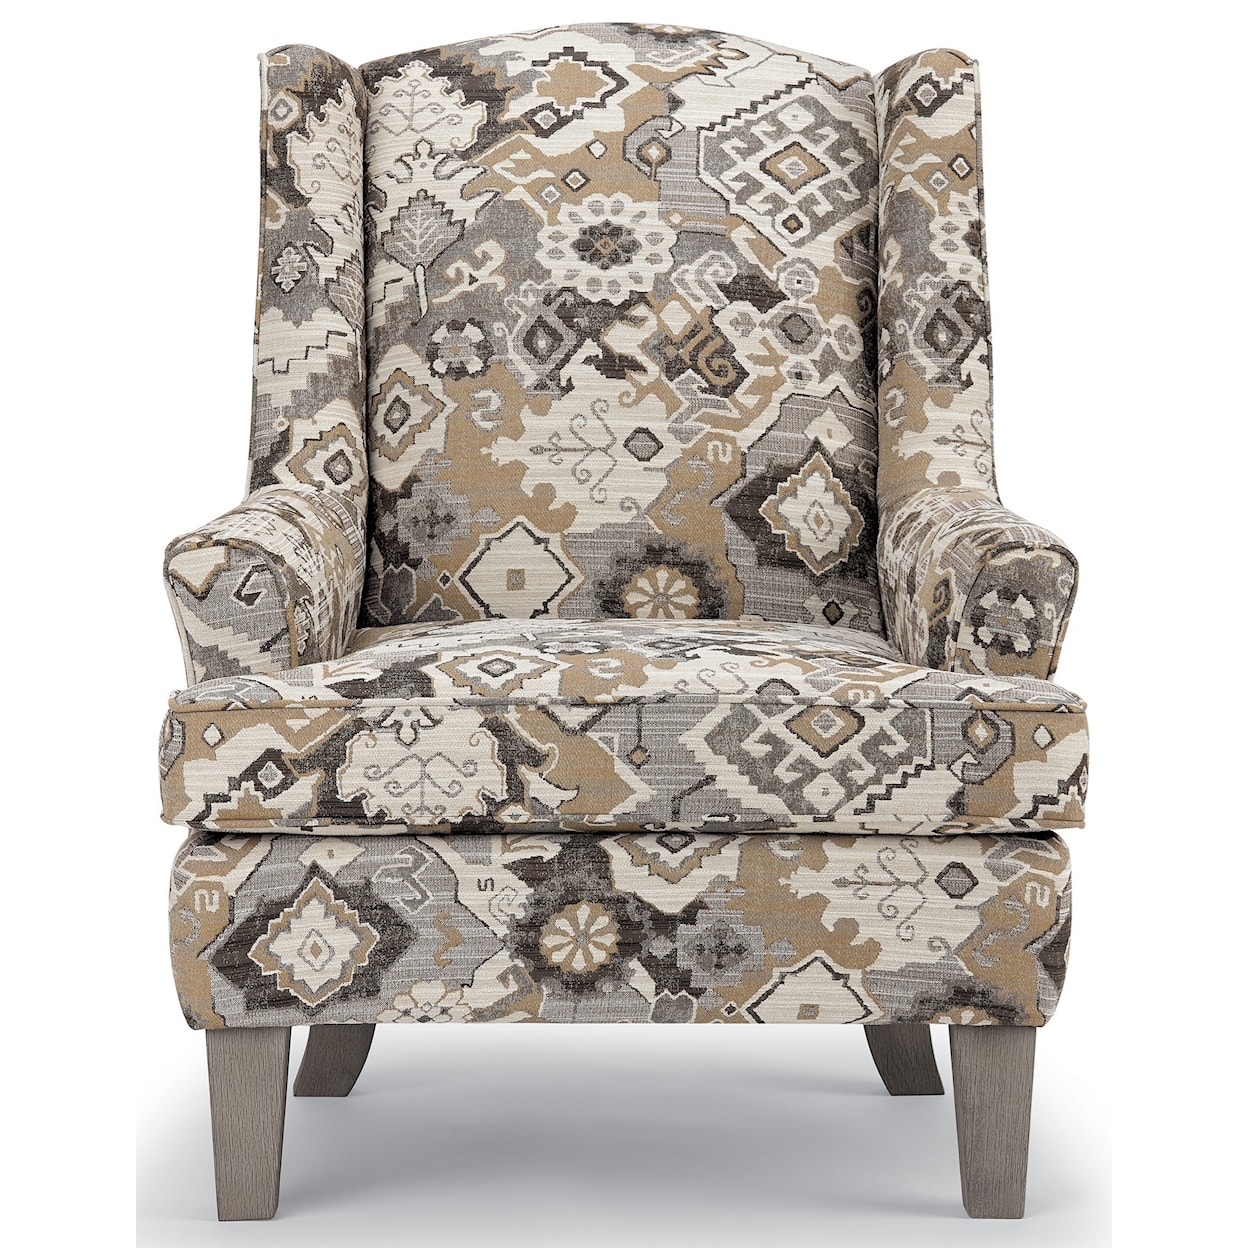 Best Home Furnishings Andrea Andrea Wing Chair